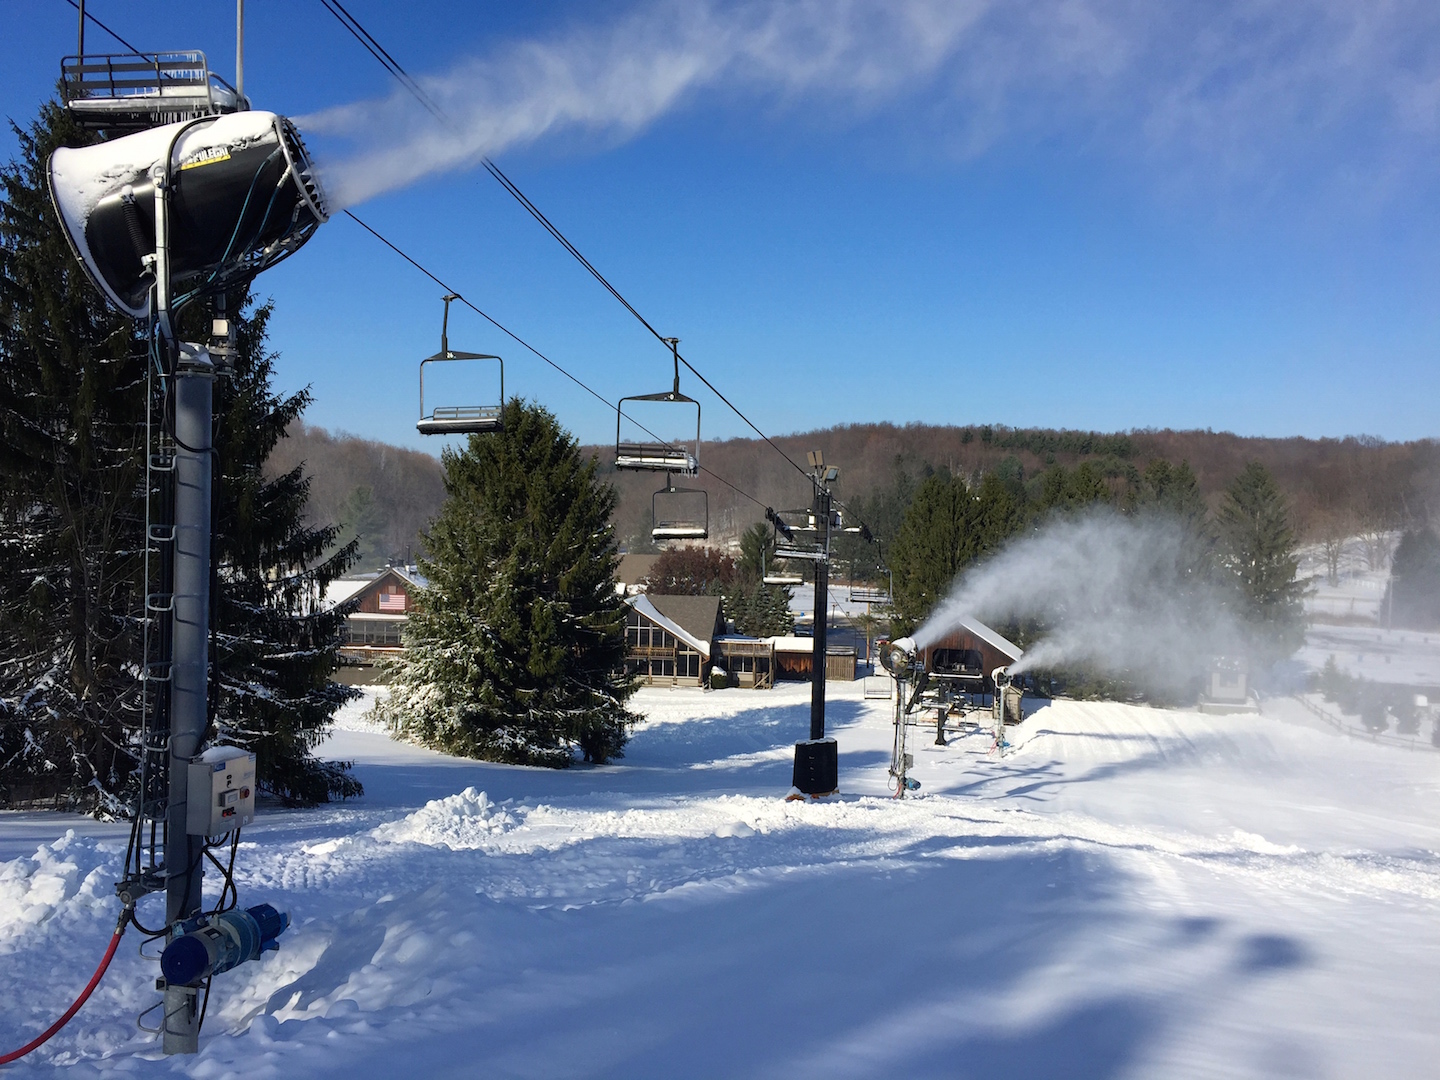 #STsnowmaking at Snow Trails